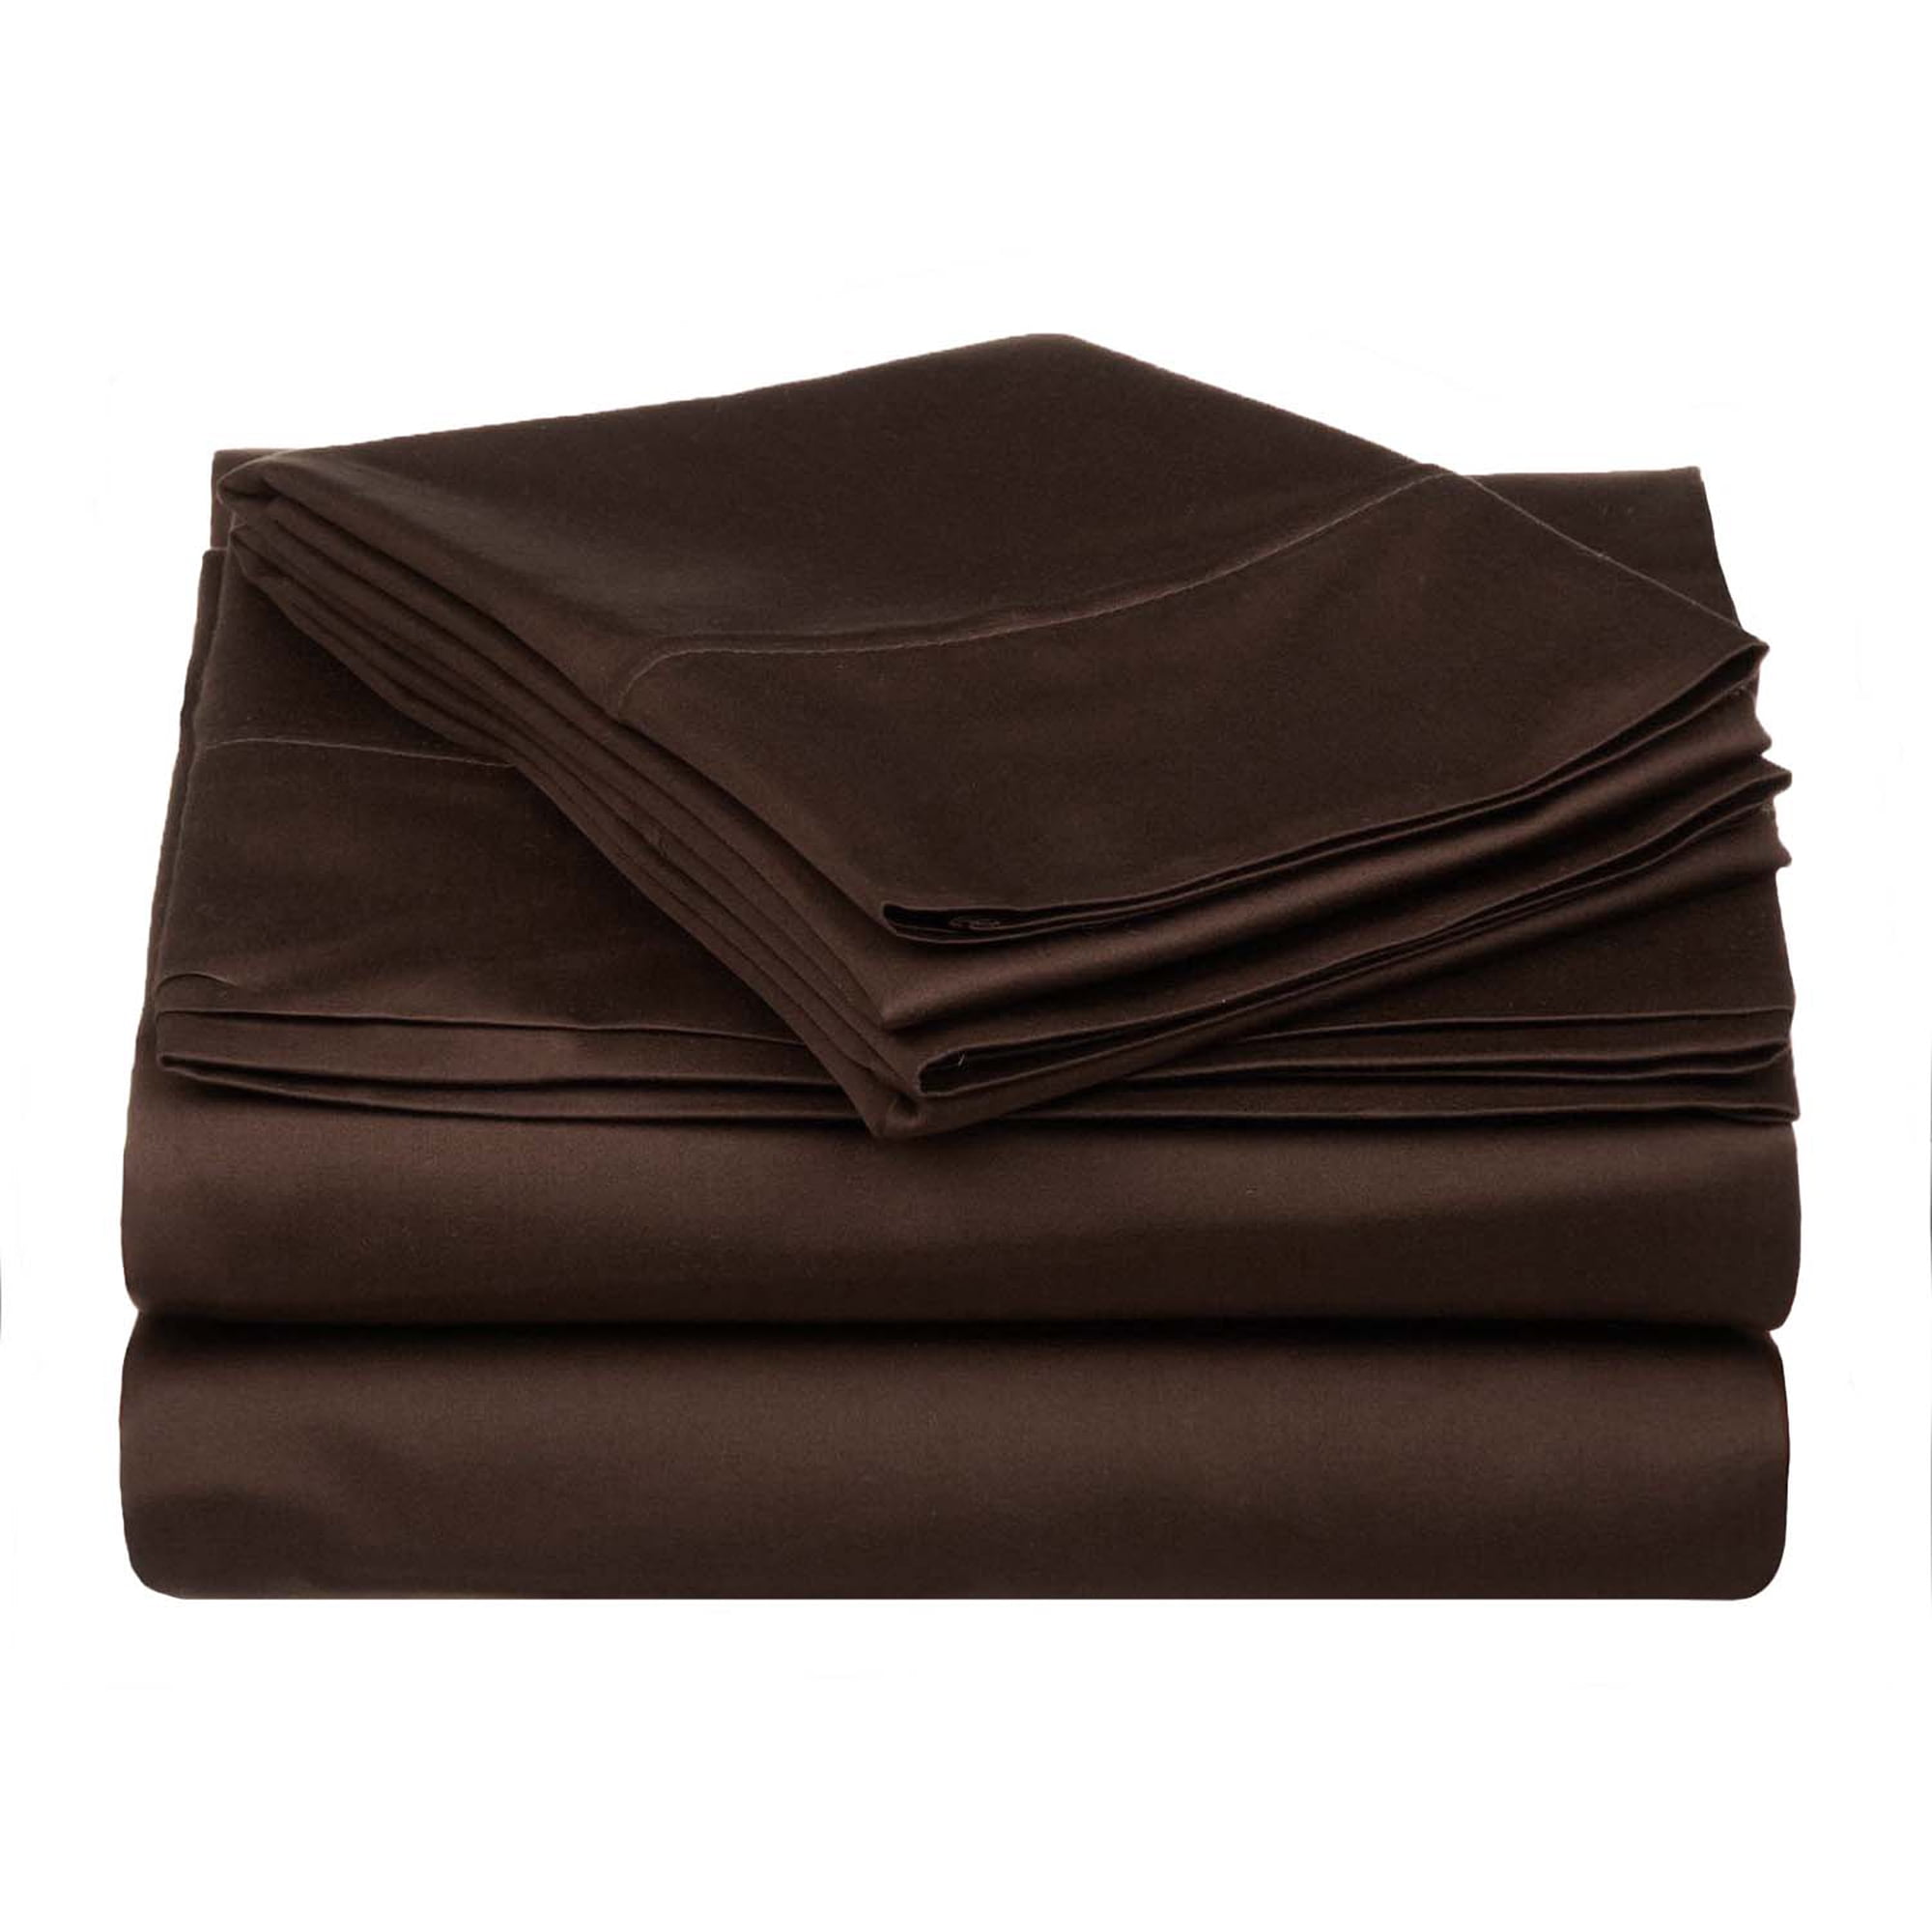 4PCs All Extra Deep Pkt & Sizes  Brown Solid Sheet Set 1000 TC Egyptian Cotton 